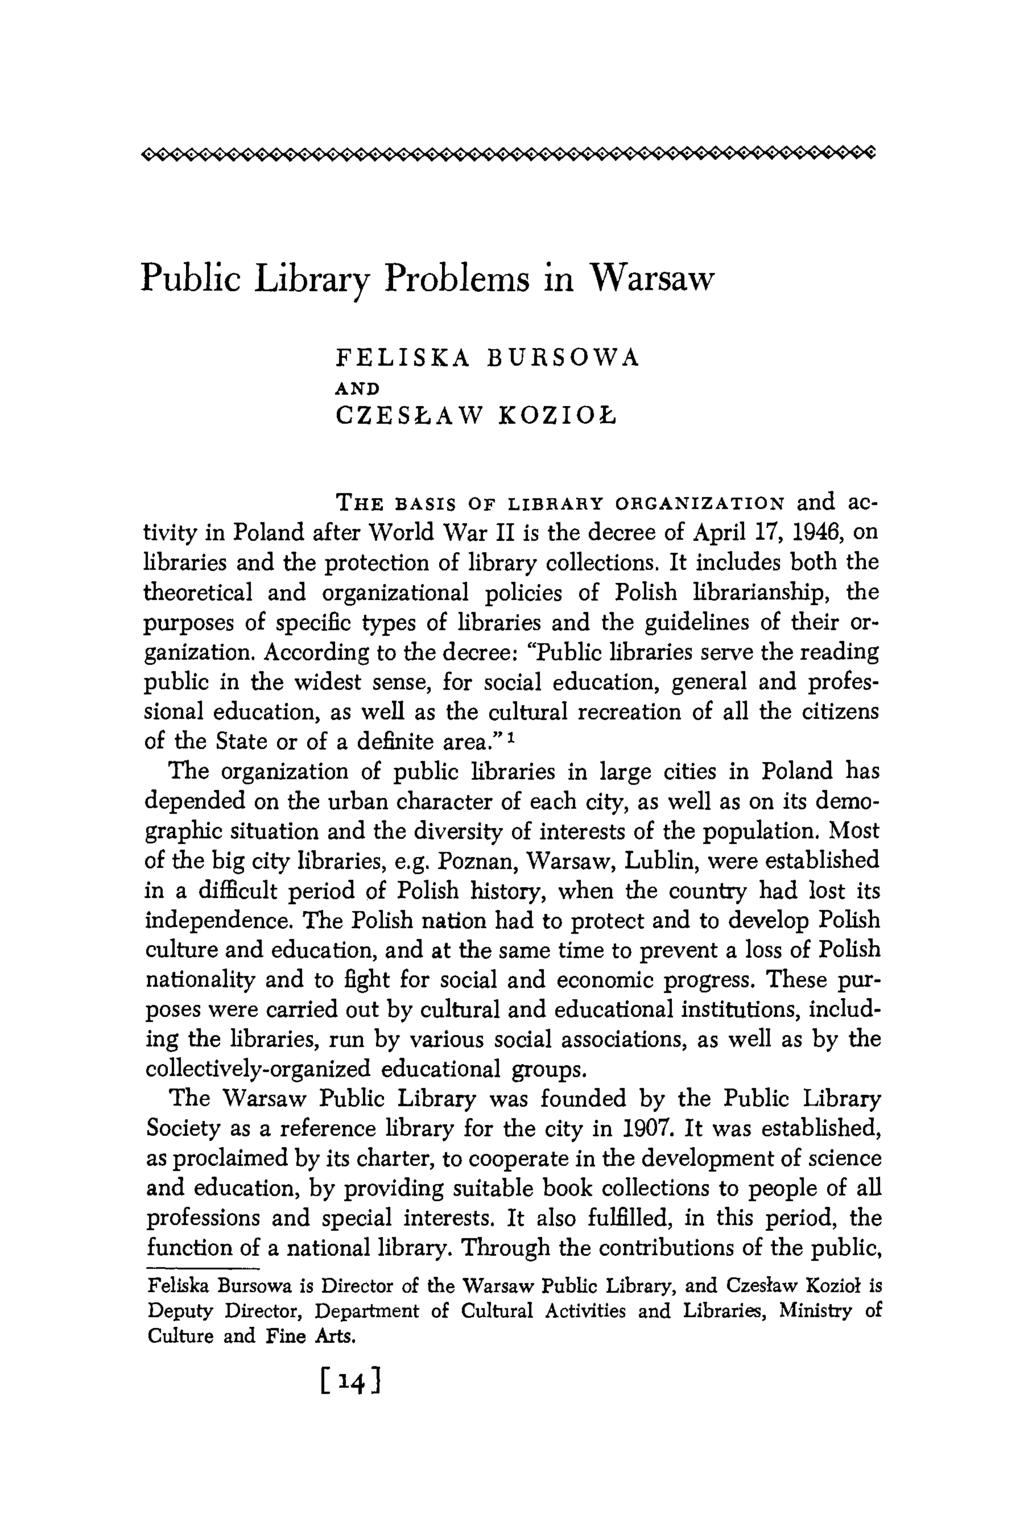 FELISKA BURSOWA AND CZESEAW KOZIOE THEBASIS OF LIBRARY ORGANIZATION and activity in Poland after World War I1 is the decree of April 17, 1946, on libraries and the protection of library collections.